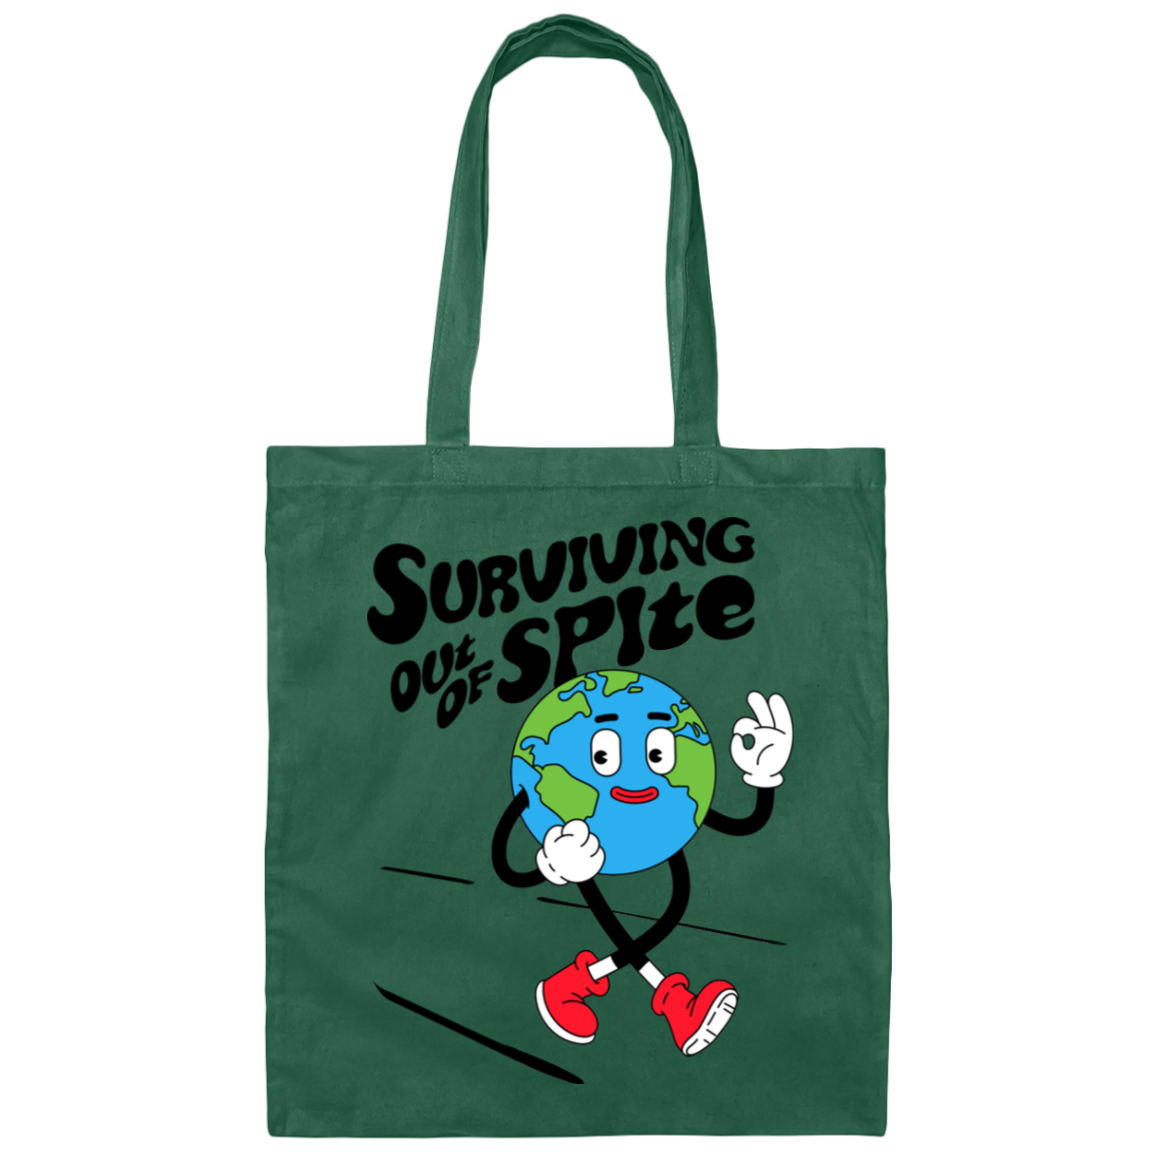 Surviving Out Of Spite Canvas Tote Bag